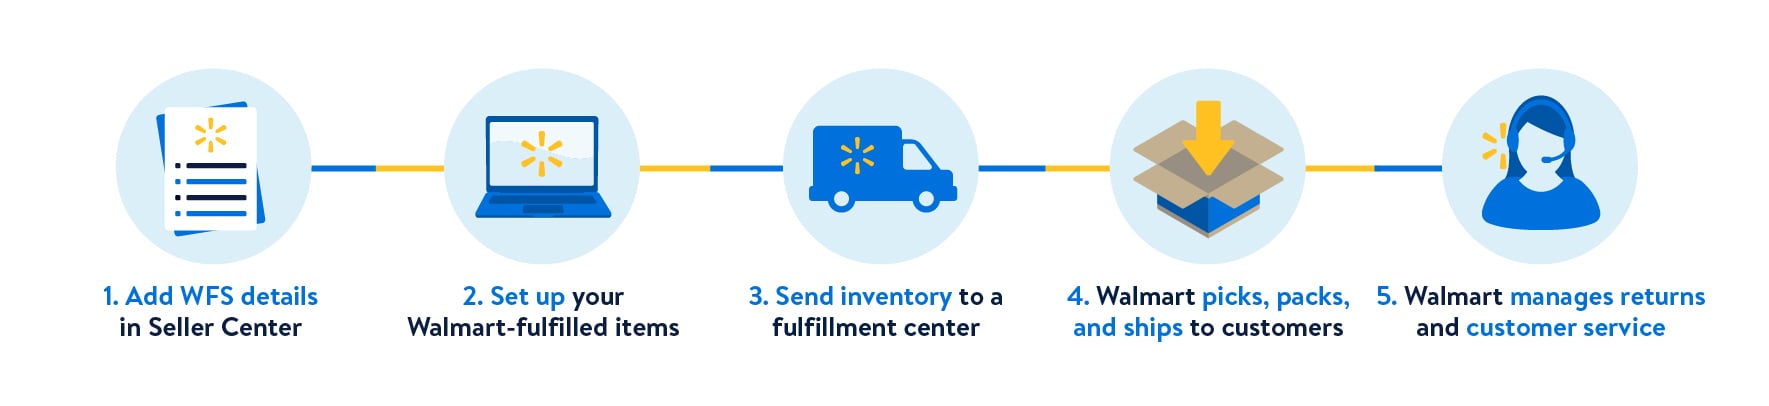 Walmart Fulfillment Services broken down into 5 different stages